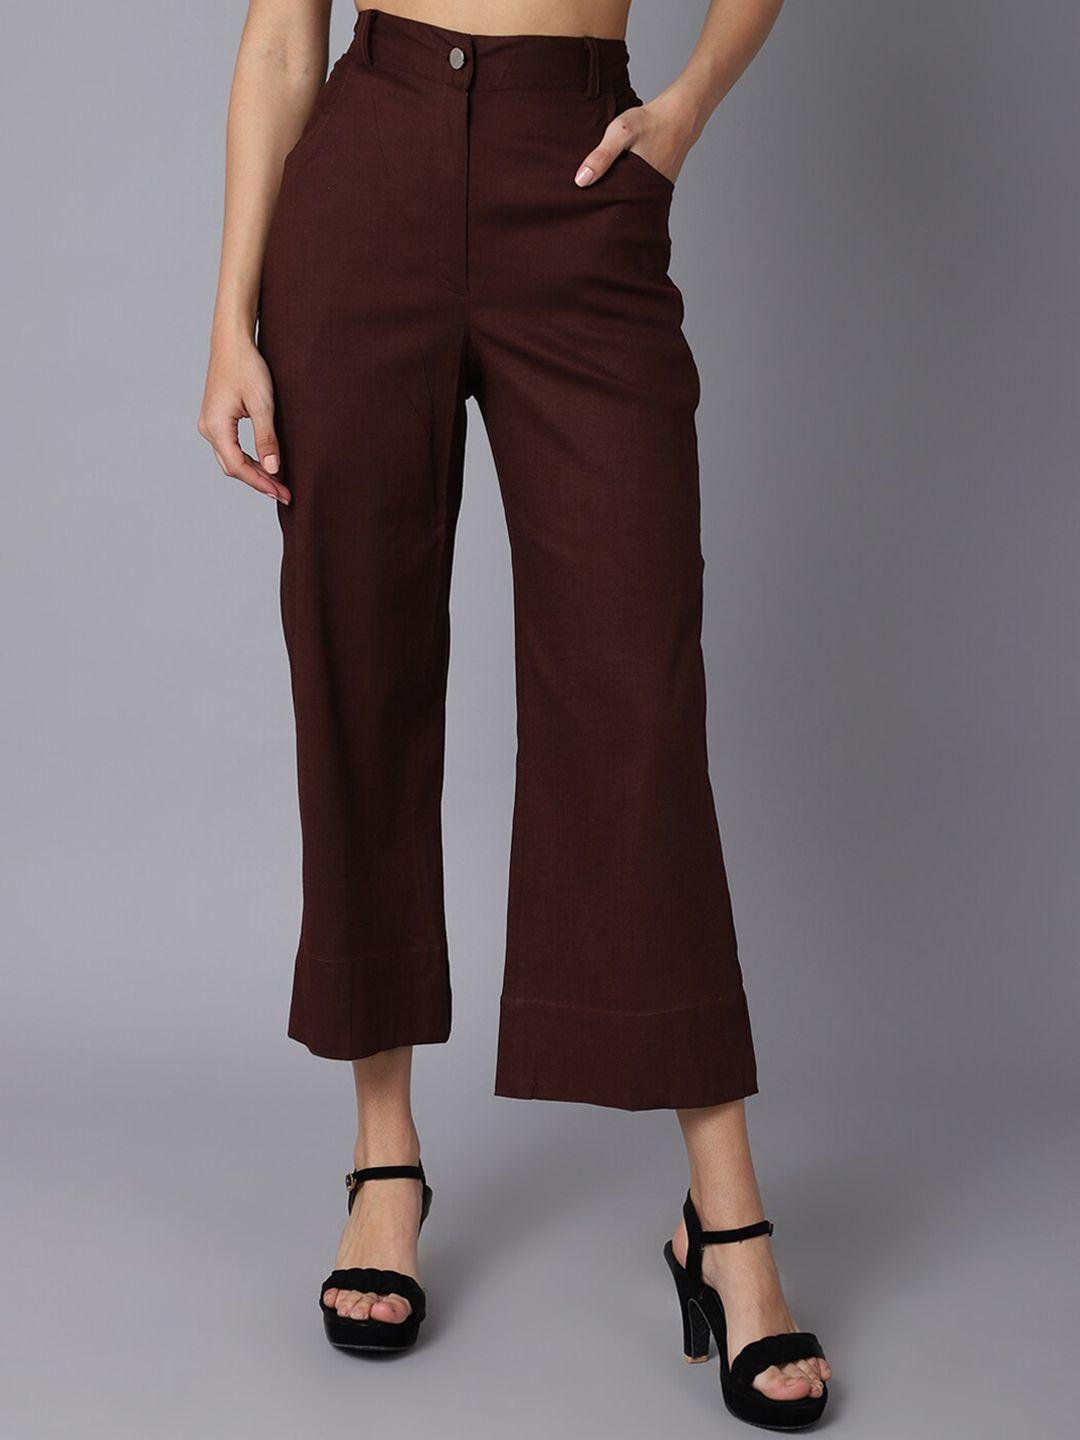 tag-7-women-brown-smart-flared-culottes-trousers